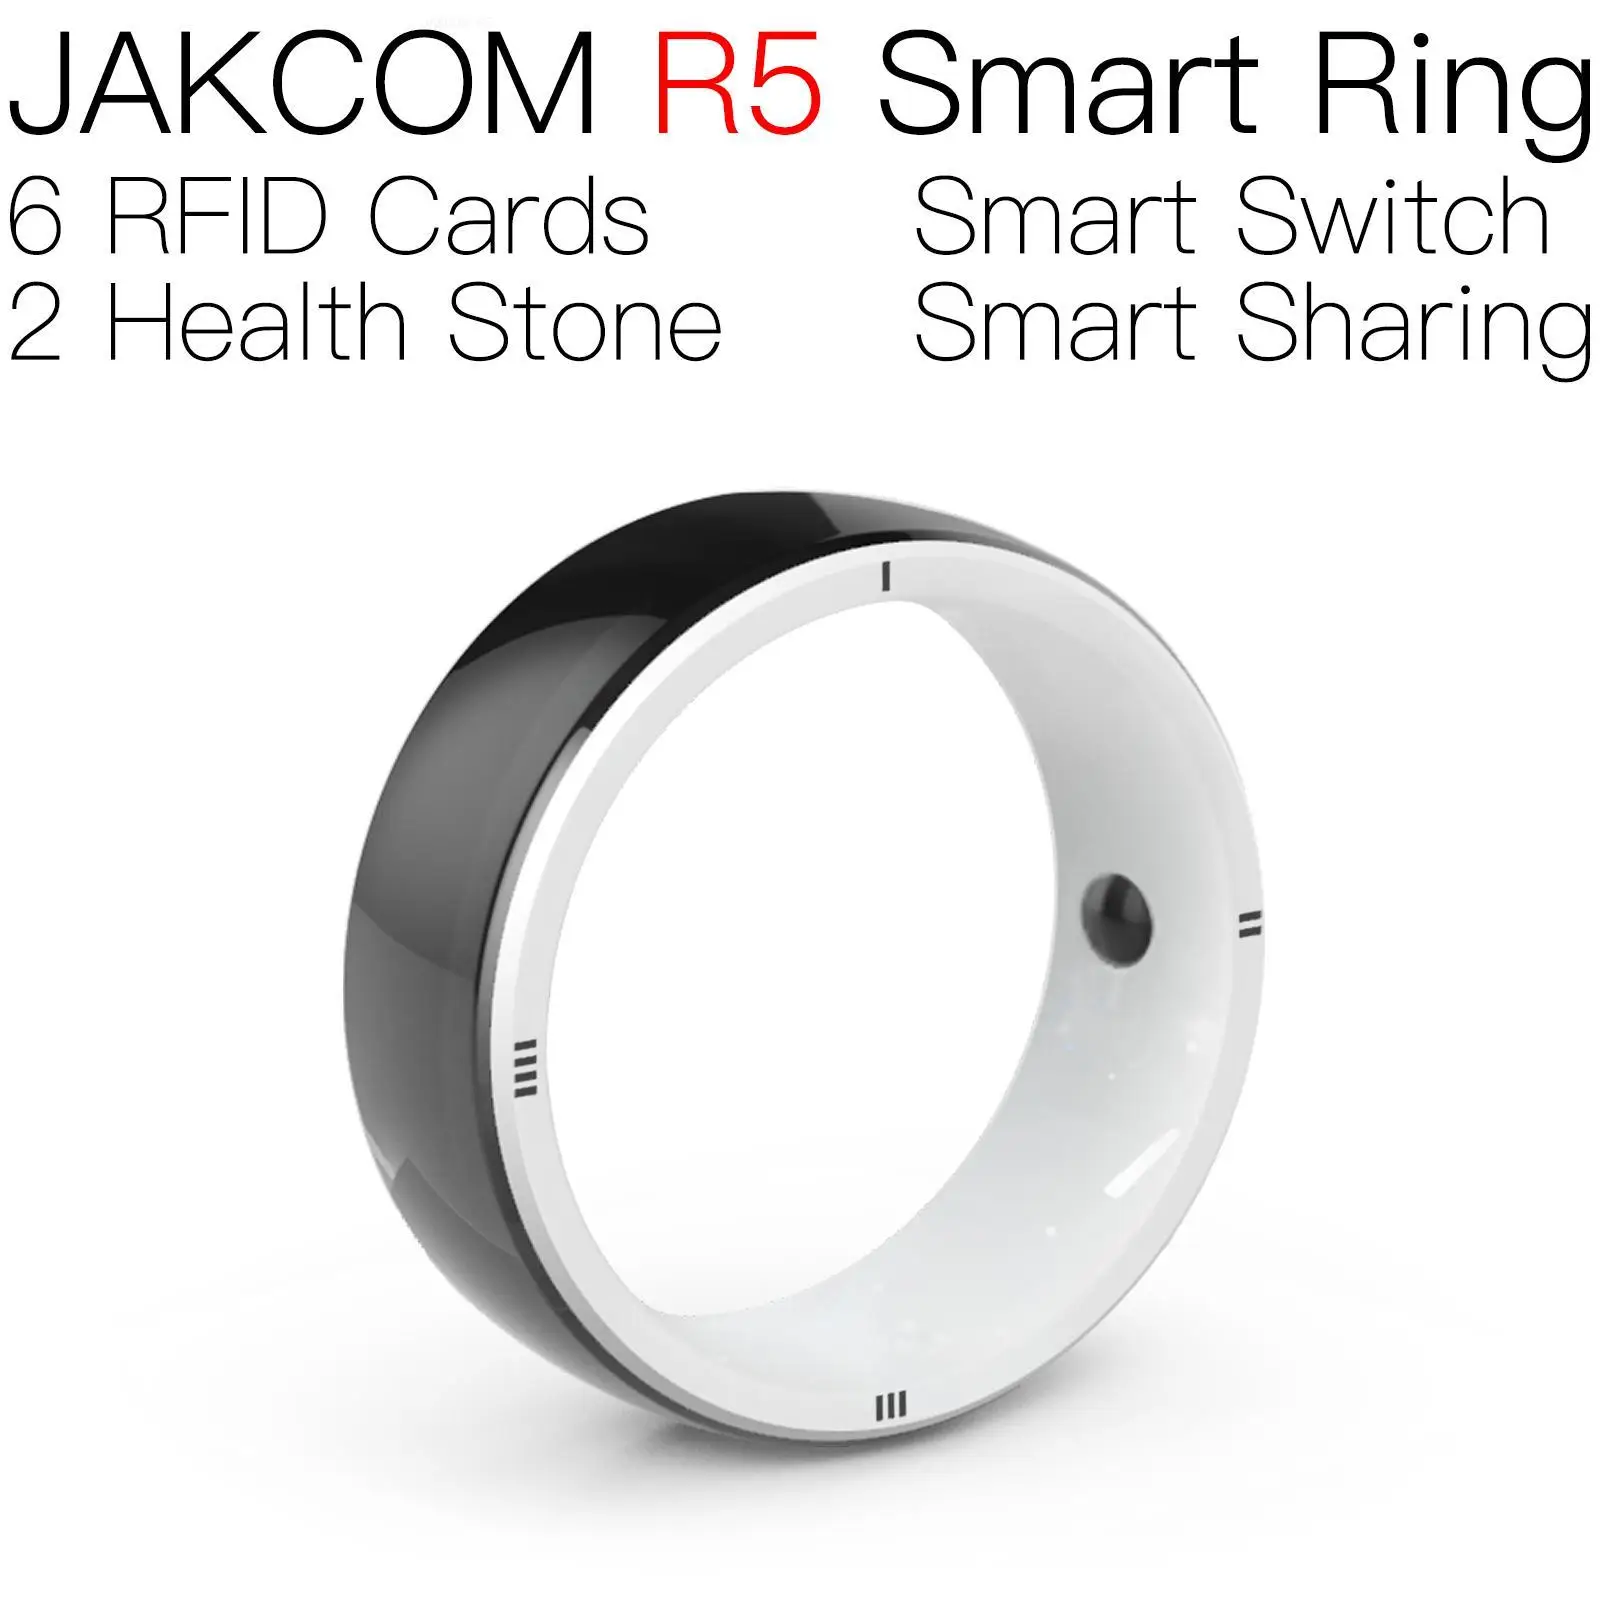 

JAKCOM R5 Smart Ring Match to uid rfid human chip changeable nfc chips 215 t5577 rewritable 125khz ring esp01 breadboard card